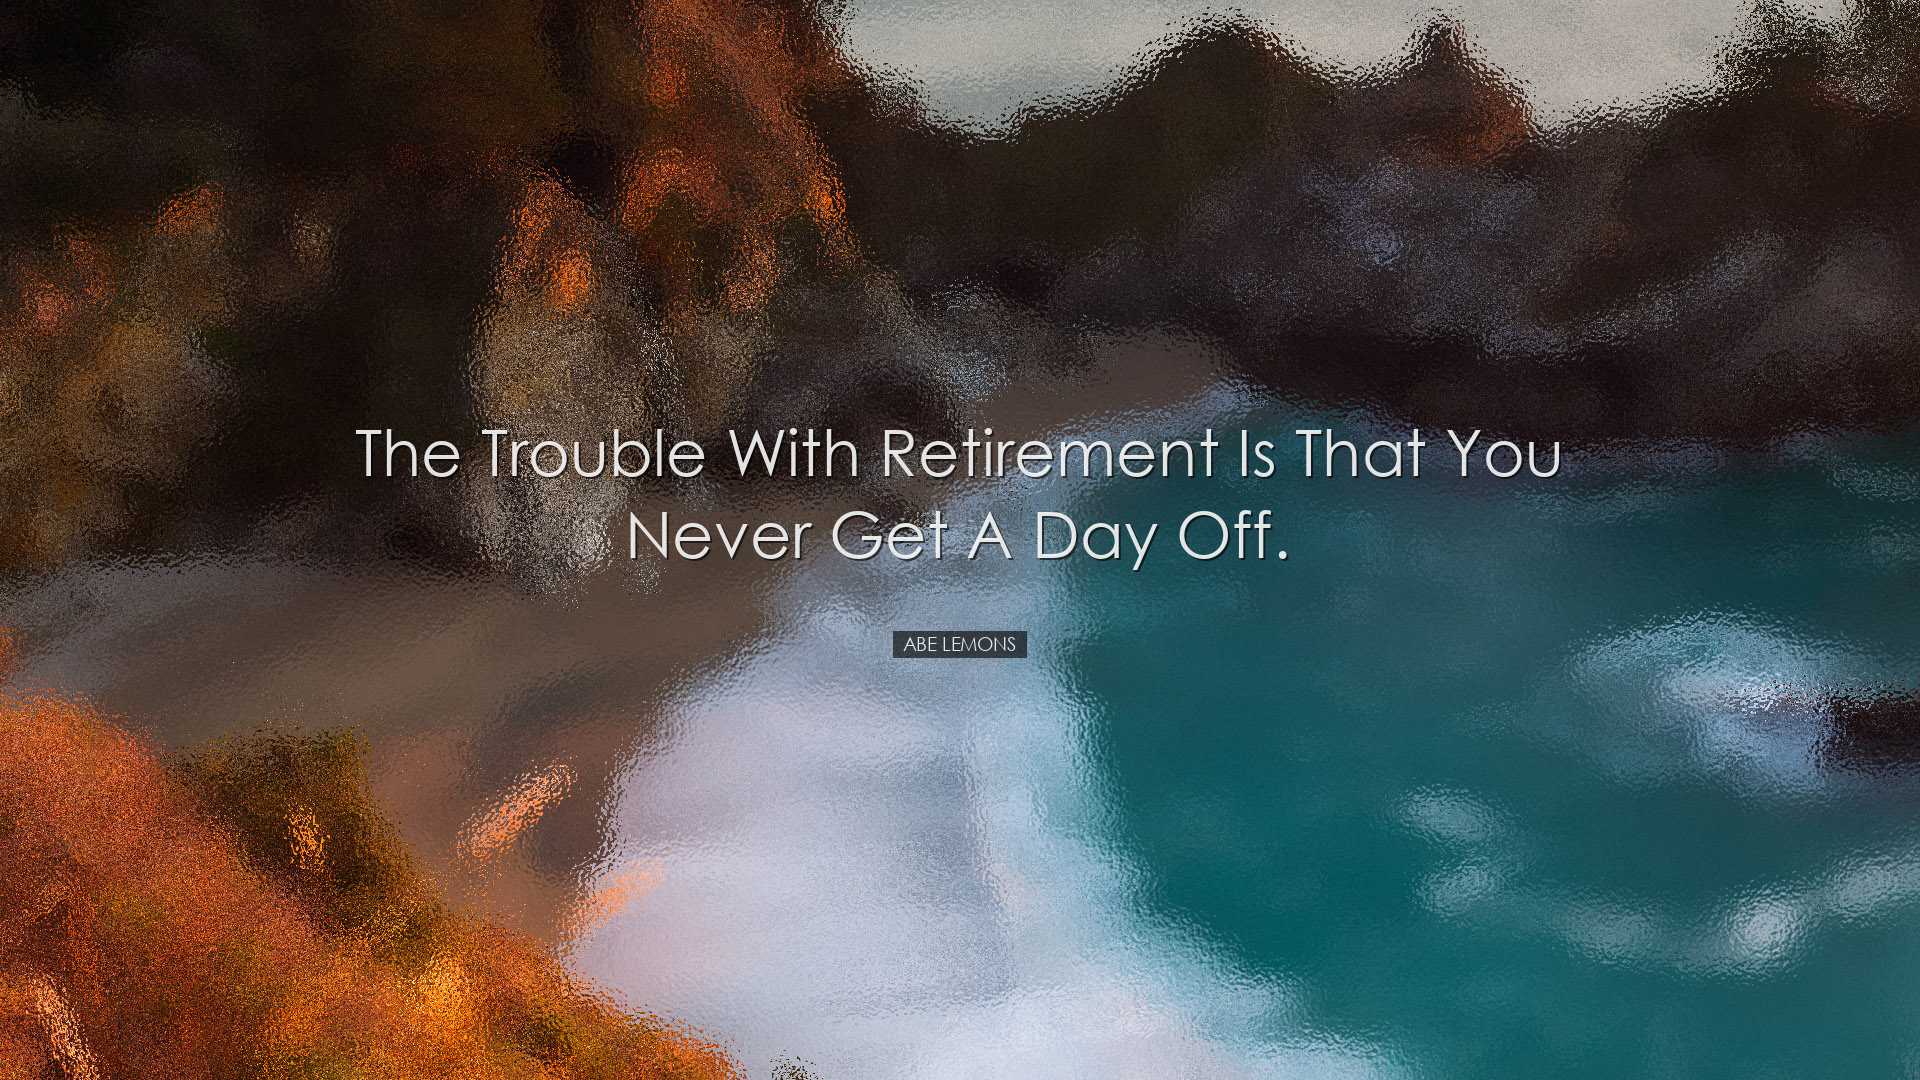 The trouble with retirement is that you never get a day off. - Abe